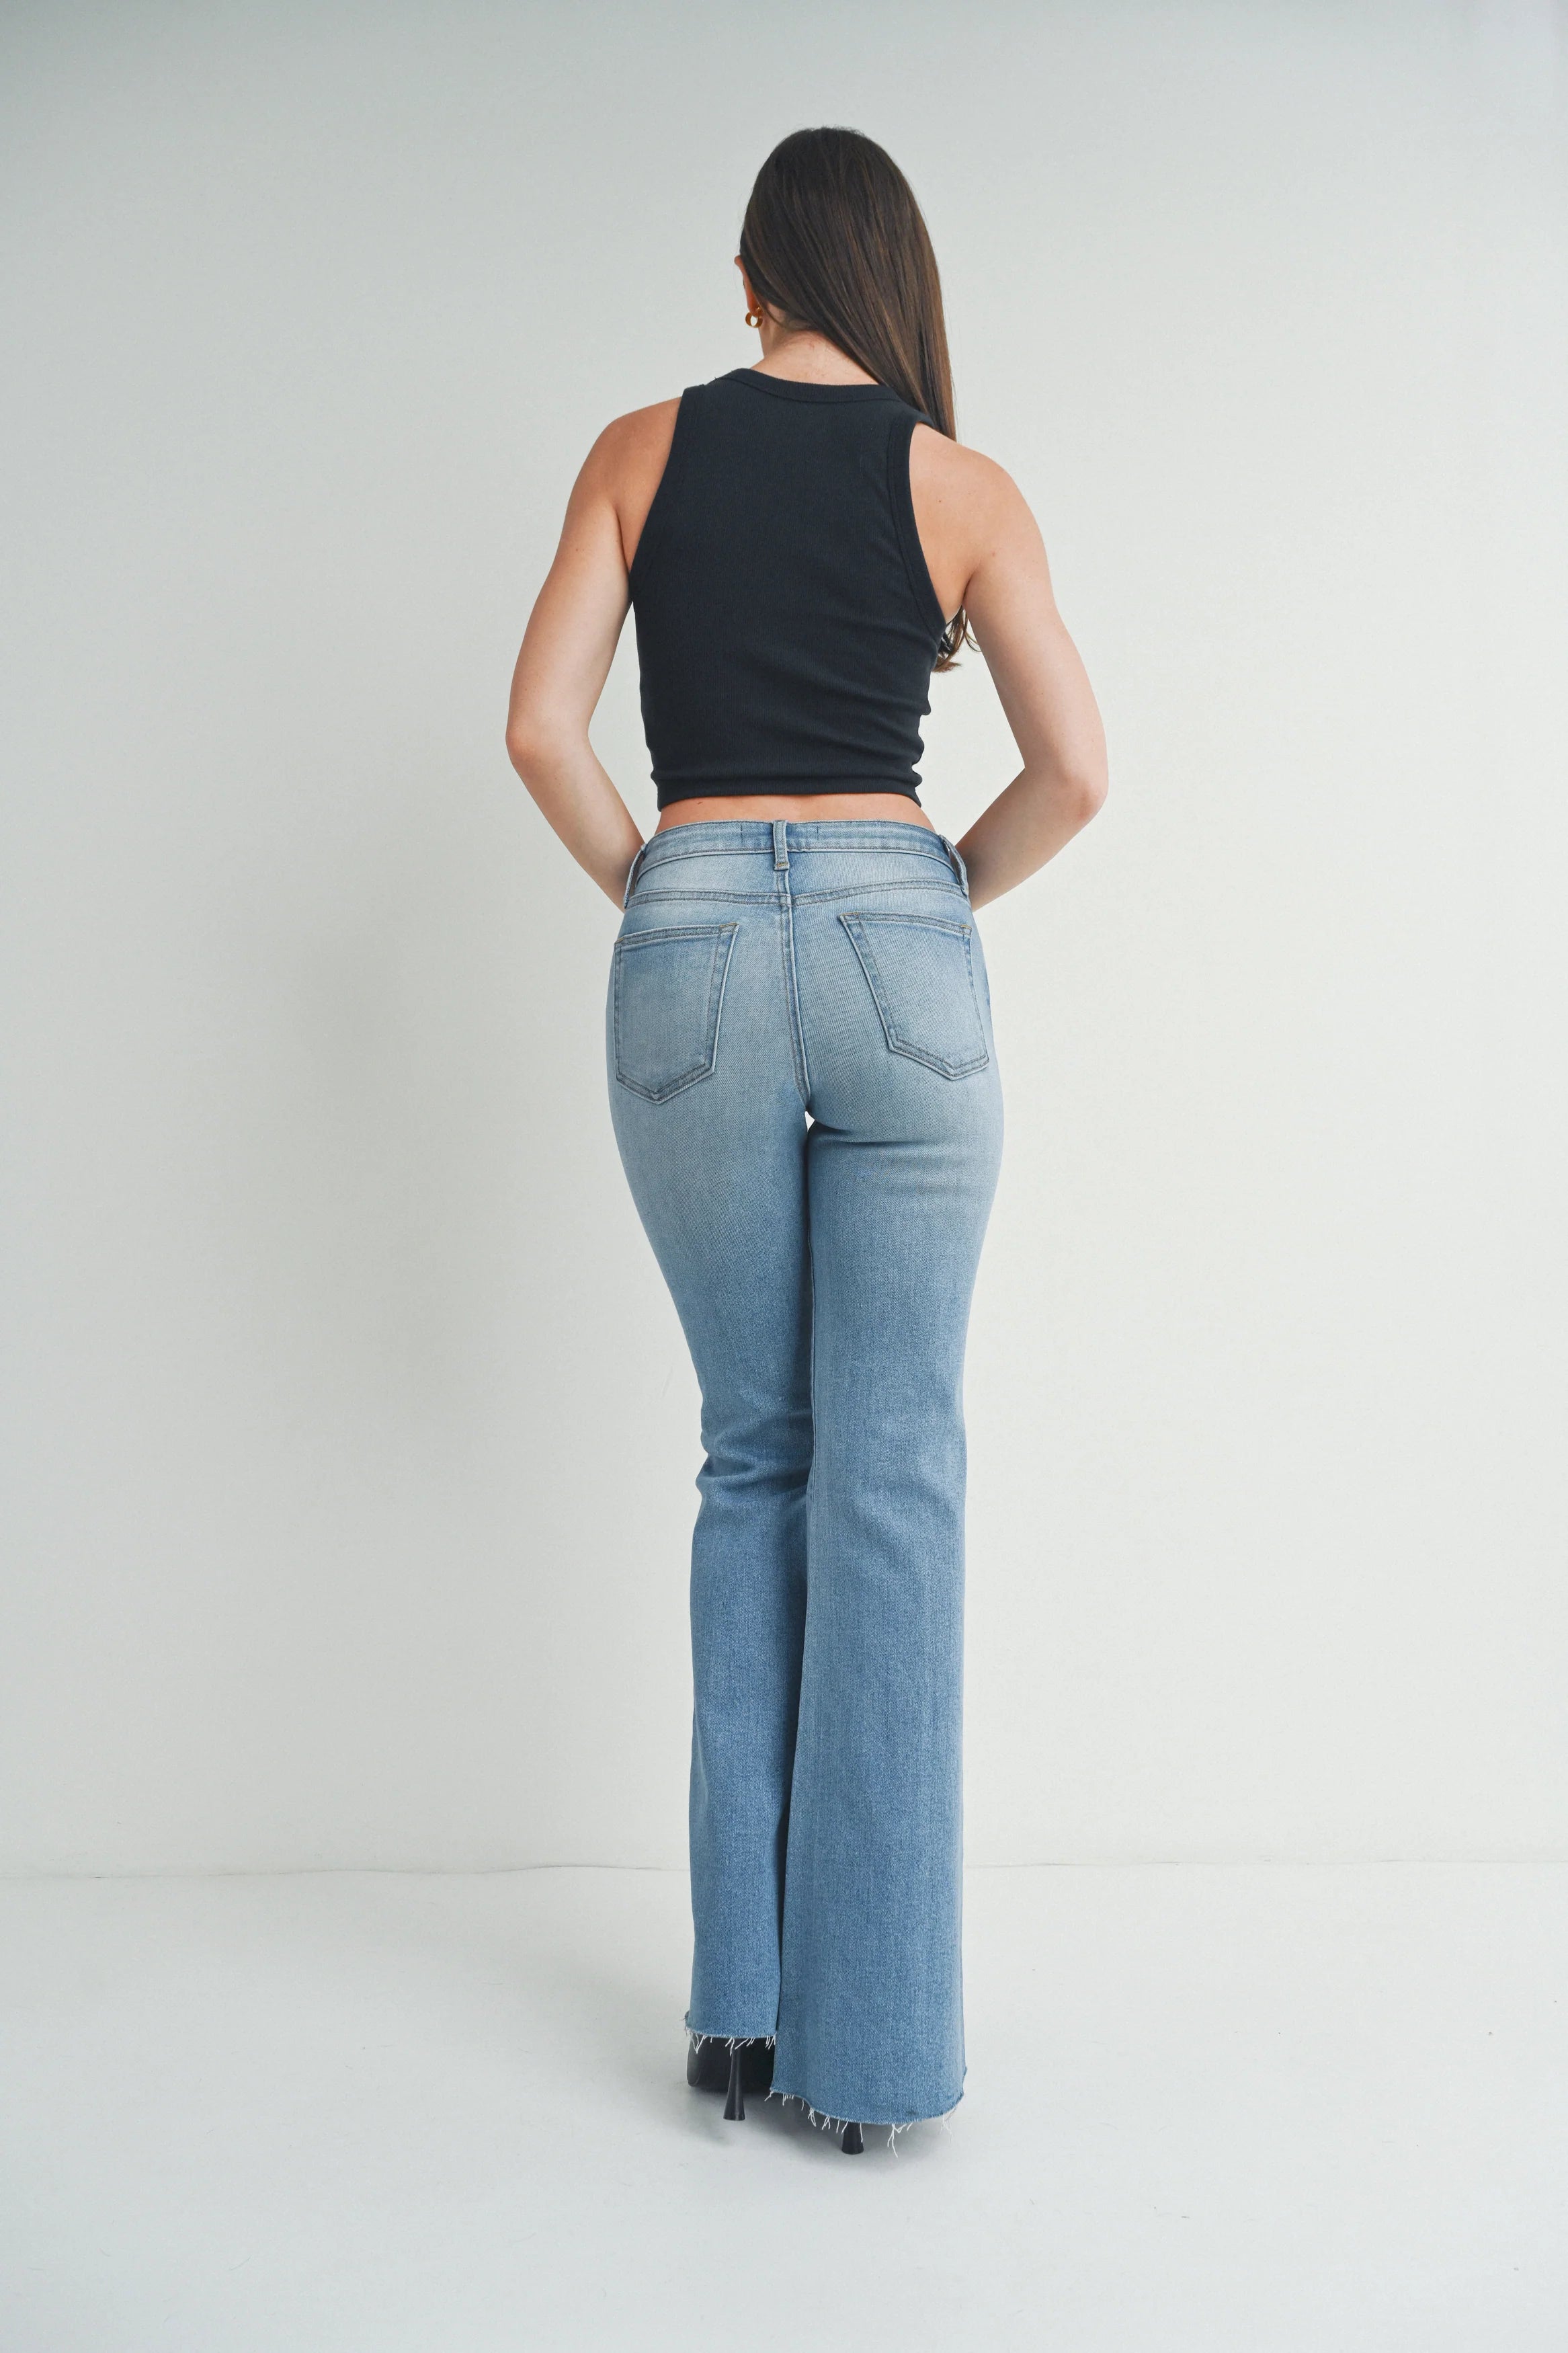 The Mia Straight Bootcut Jeans by Just Black Denim